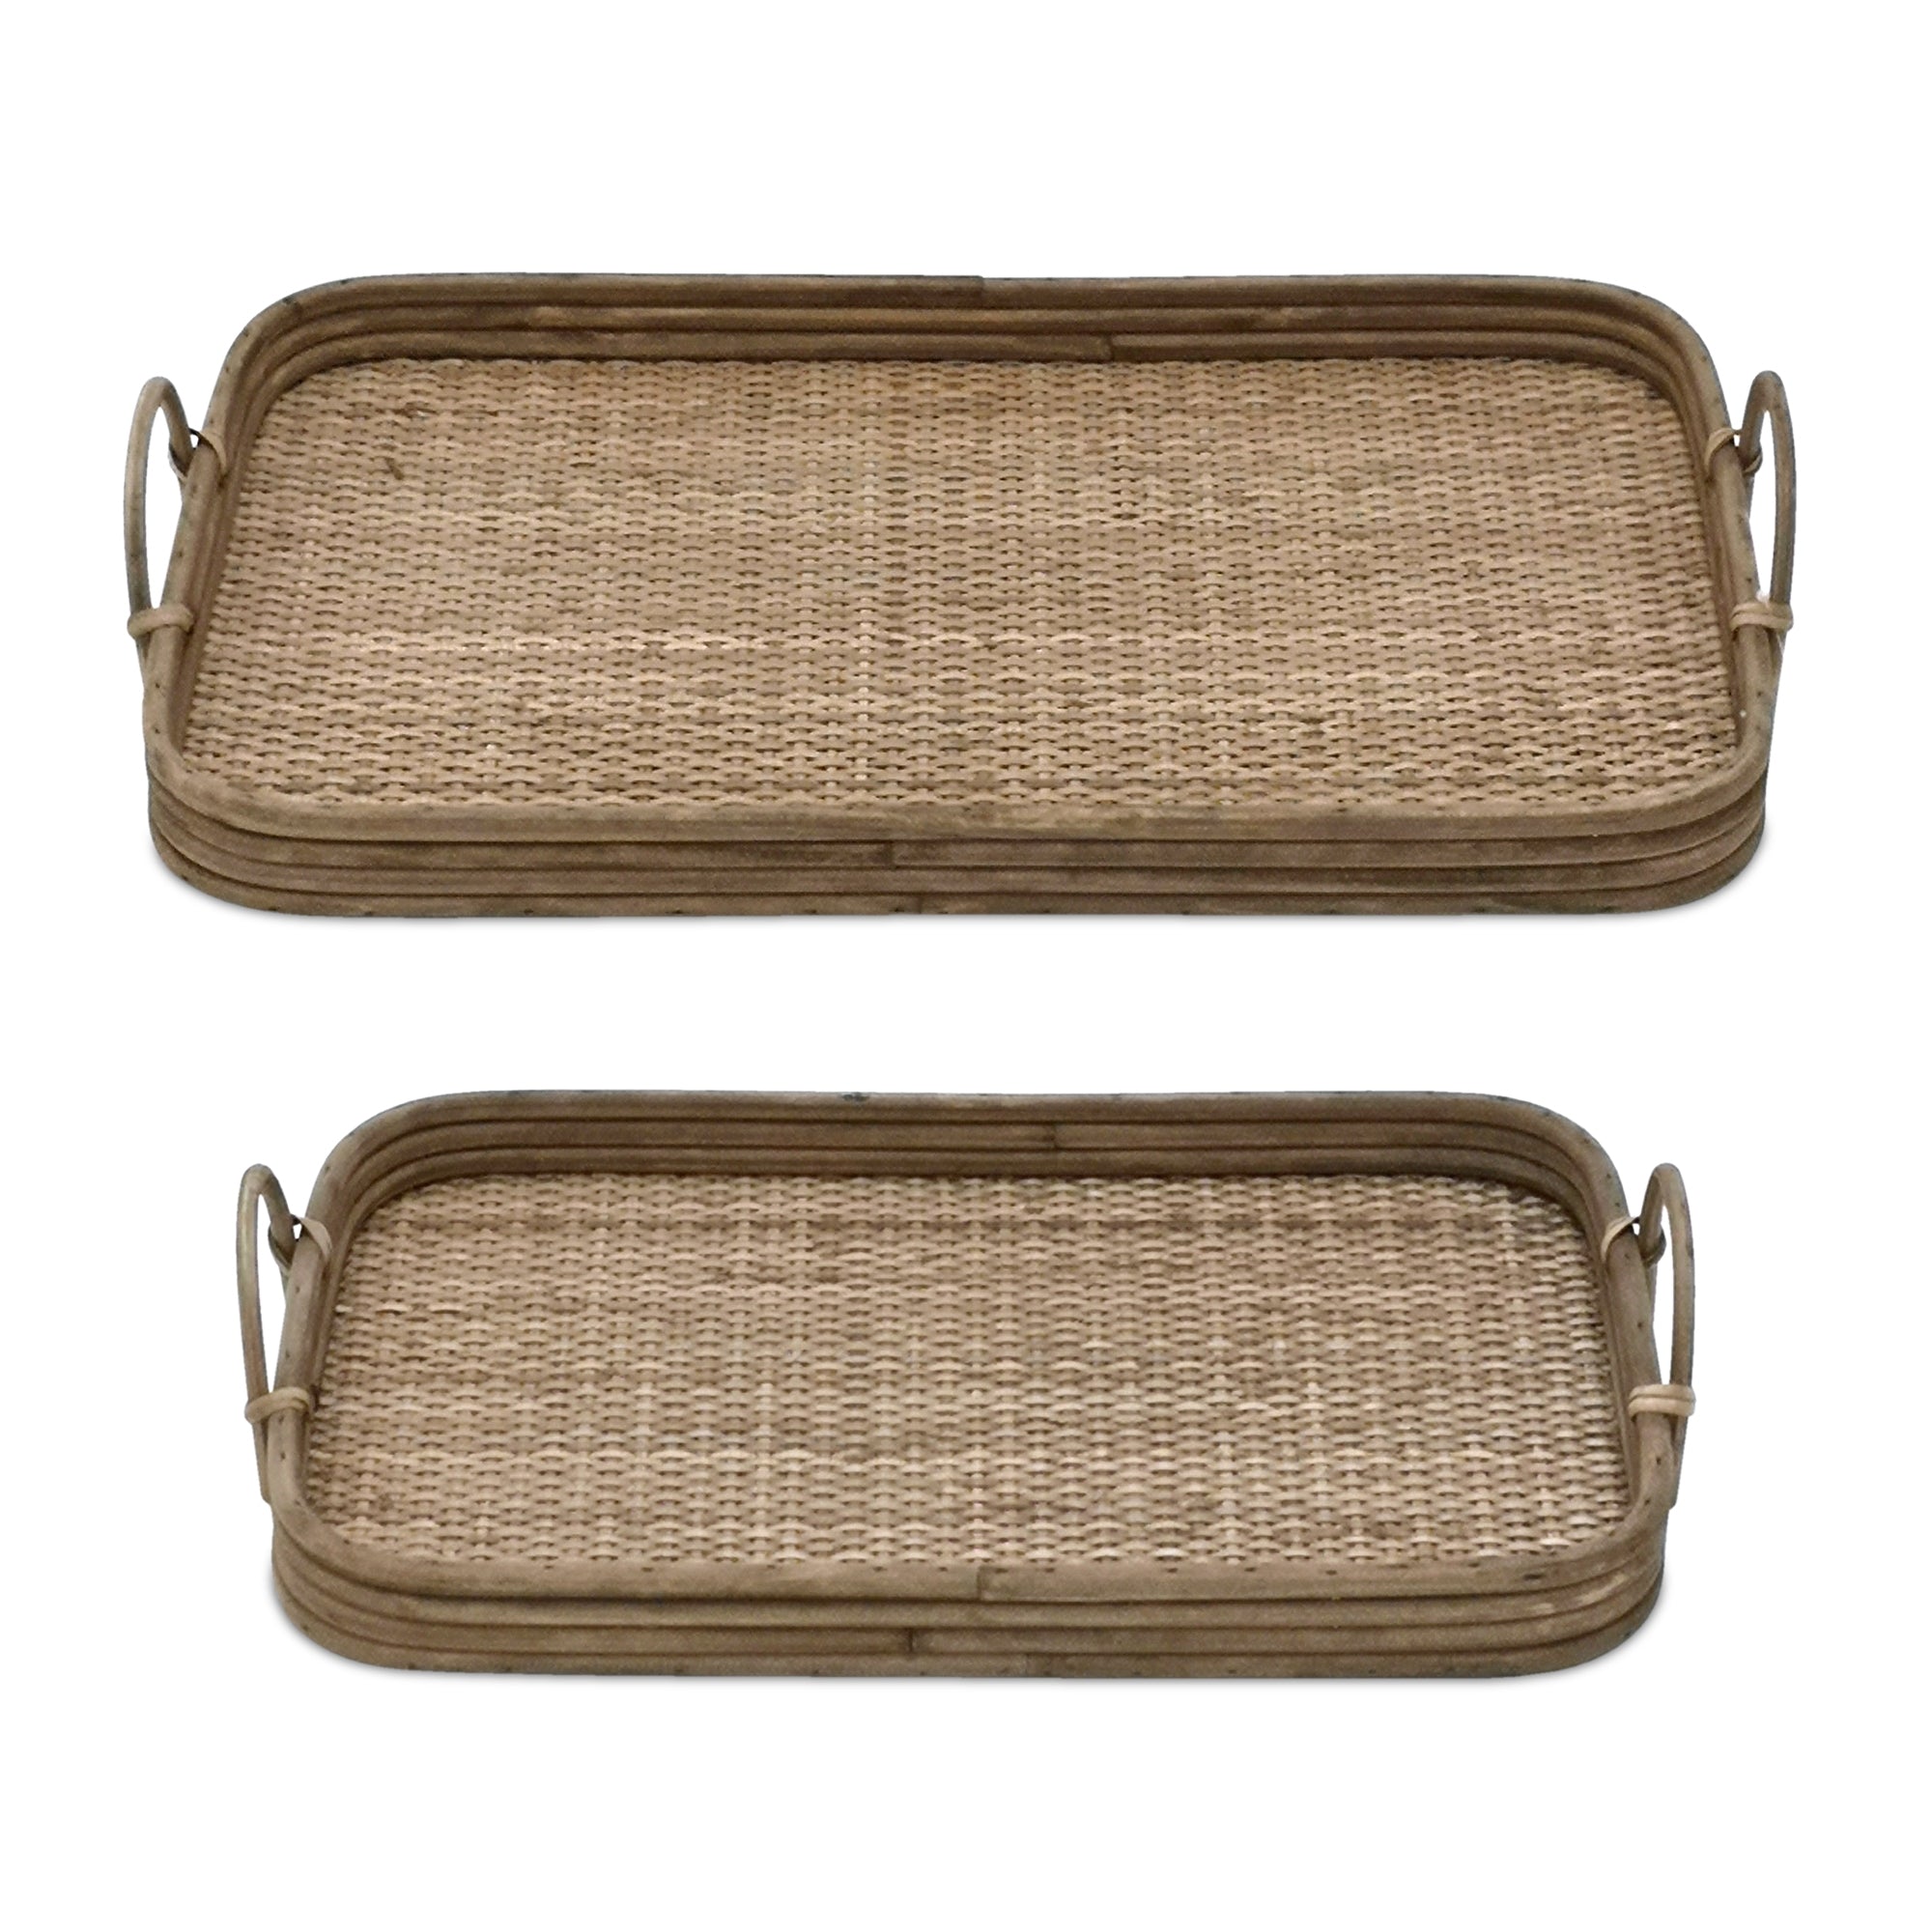 Woven-Rattan-Tray-with-Handles,-Set-of-2-Decorative-Trays